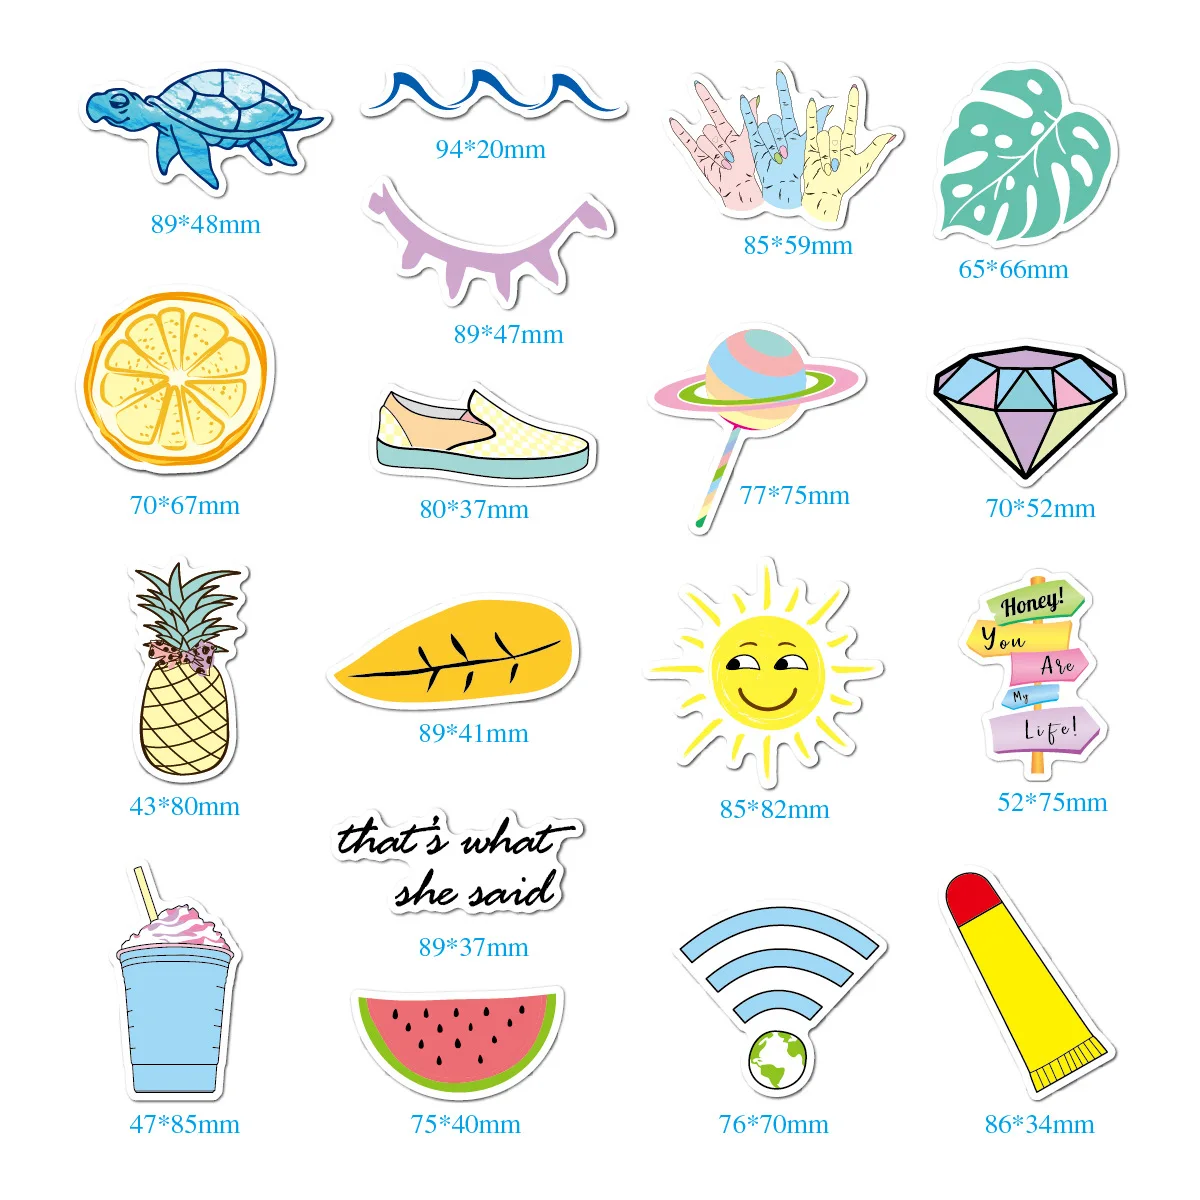 Waterproof Durable Vinyl Stickers For Laptop Pink Adorable Trendy Aesthetic Stickers Decals For Phone Skateboard Motorcycle Bicycle Luggage Guitar LAYOPO 35 Pcs Cute Water Bottles Stickers For Girls 